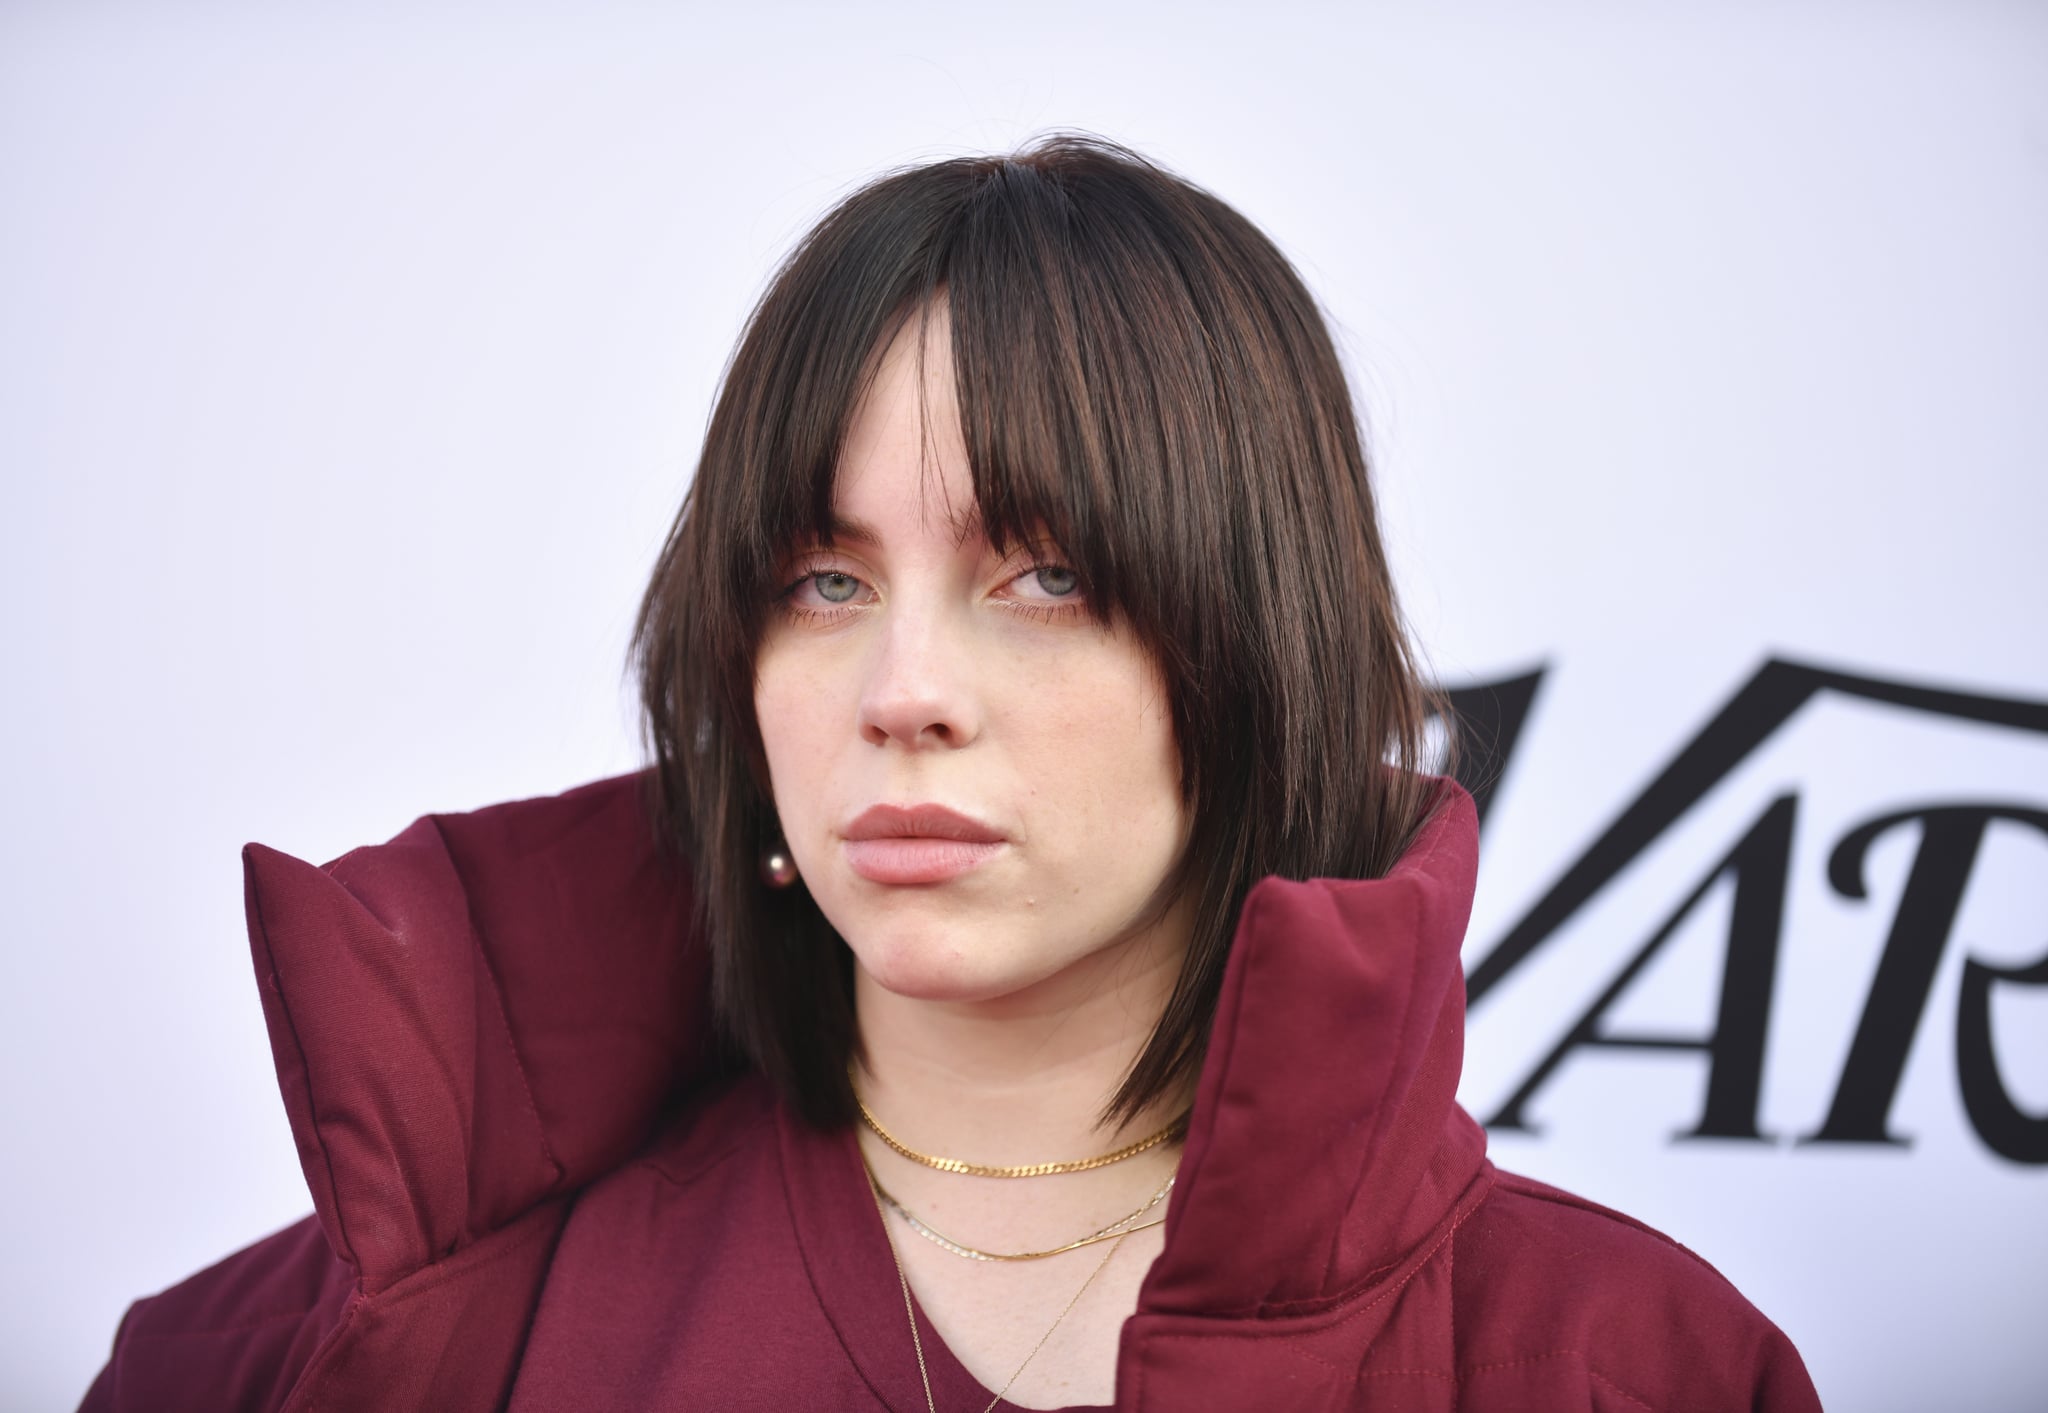 LOS ANGELES, CALIFORNIA - DECEMBER 04: Billie Eilish attends Variety 2021 Music Hitmakers Brunch presented by Peacock and GIRLS5EVA at City Market Social House on December 04, 2021 in Los Angeles, California. (Photo by Rodin Eckenroth/FilmMagic)